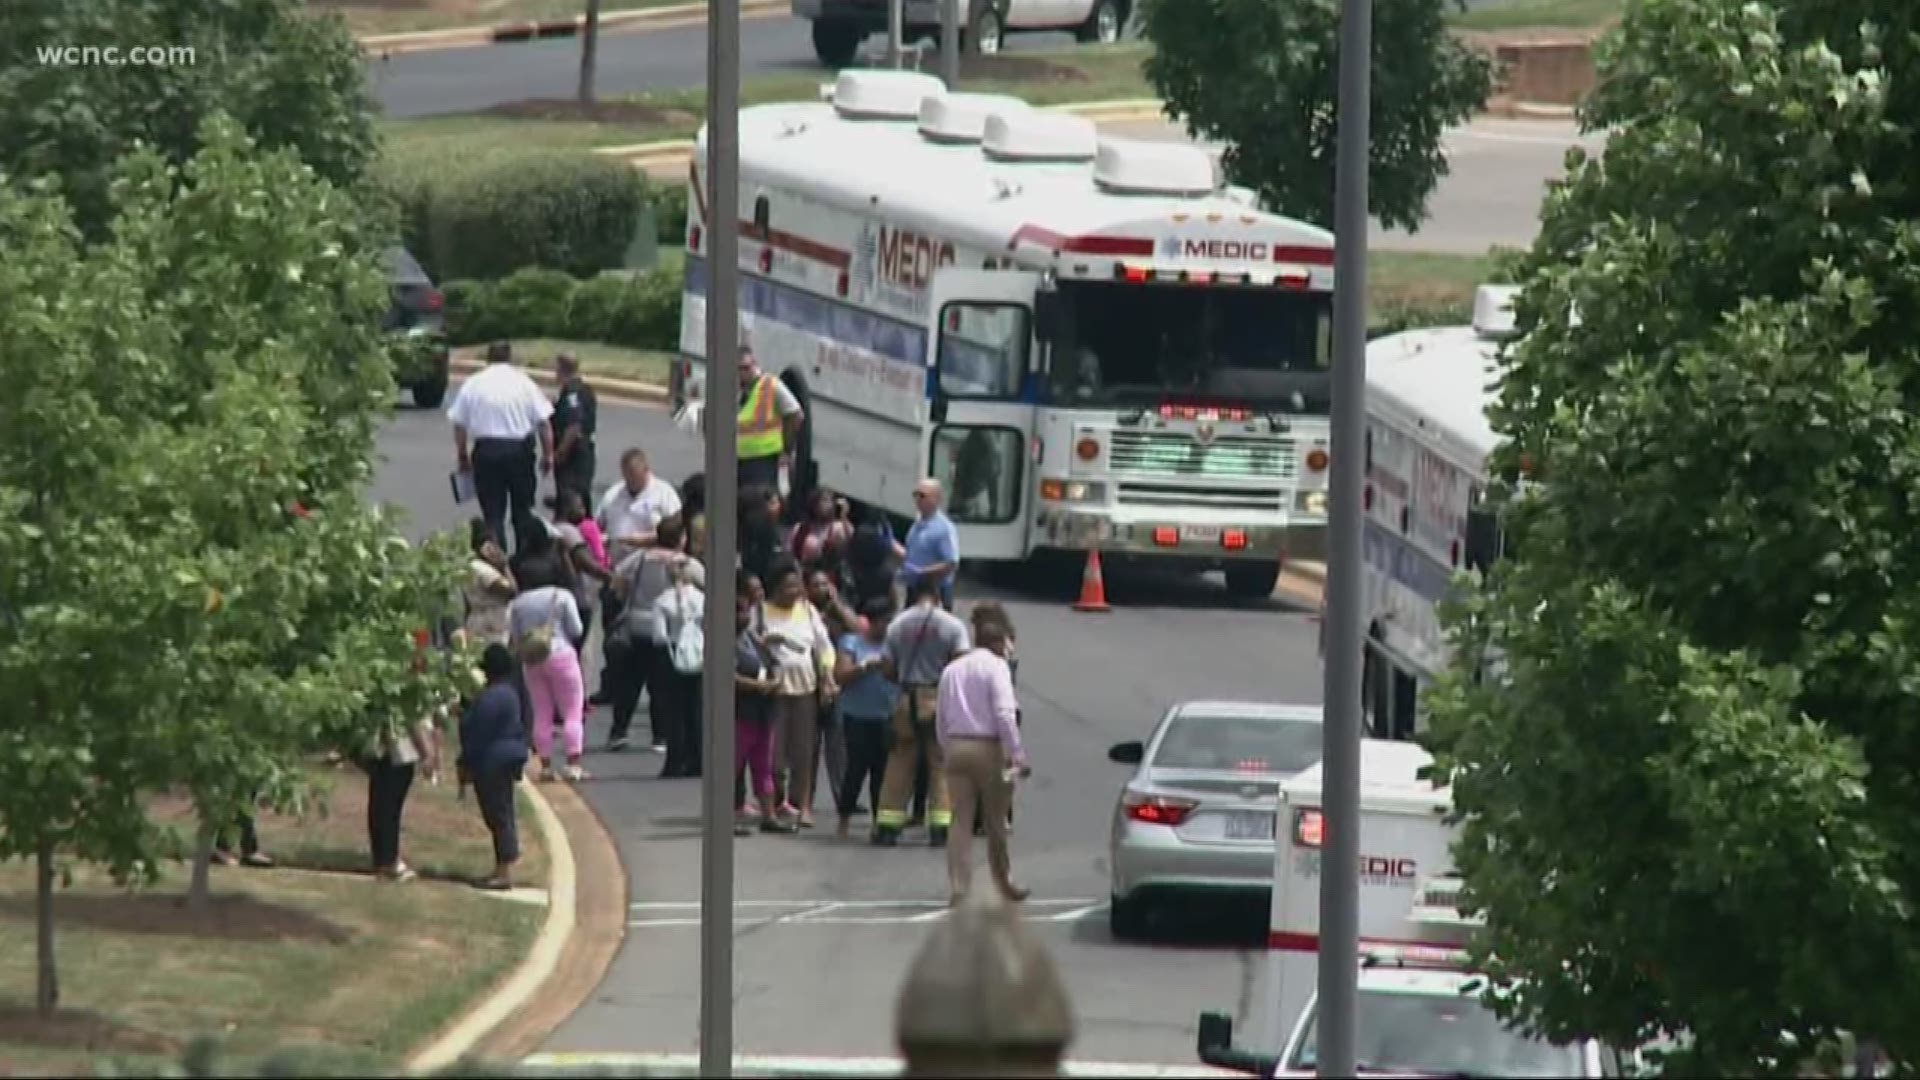 5 hospitalized, 46 ill after strong odor overtakes Charlotte office building.